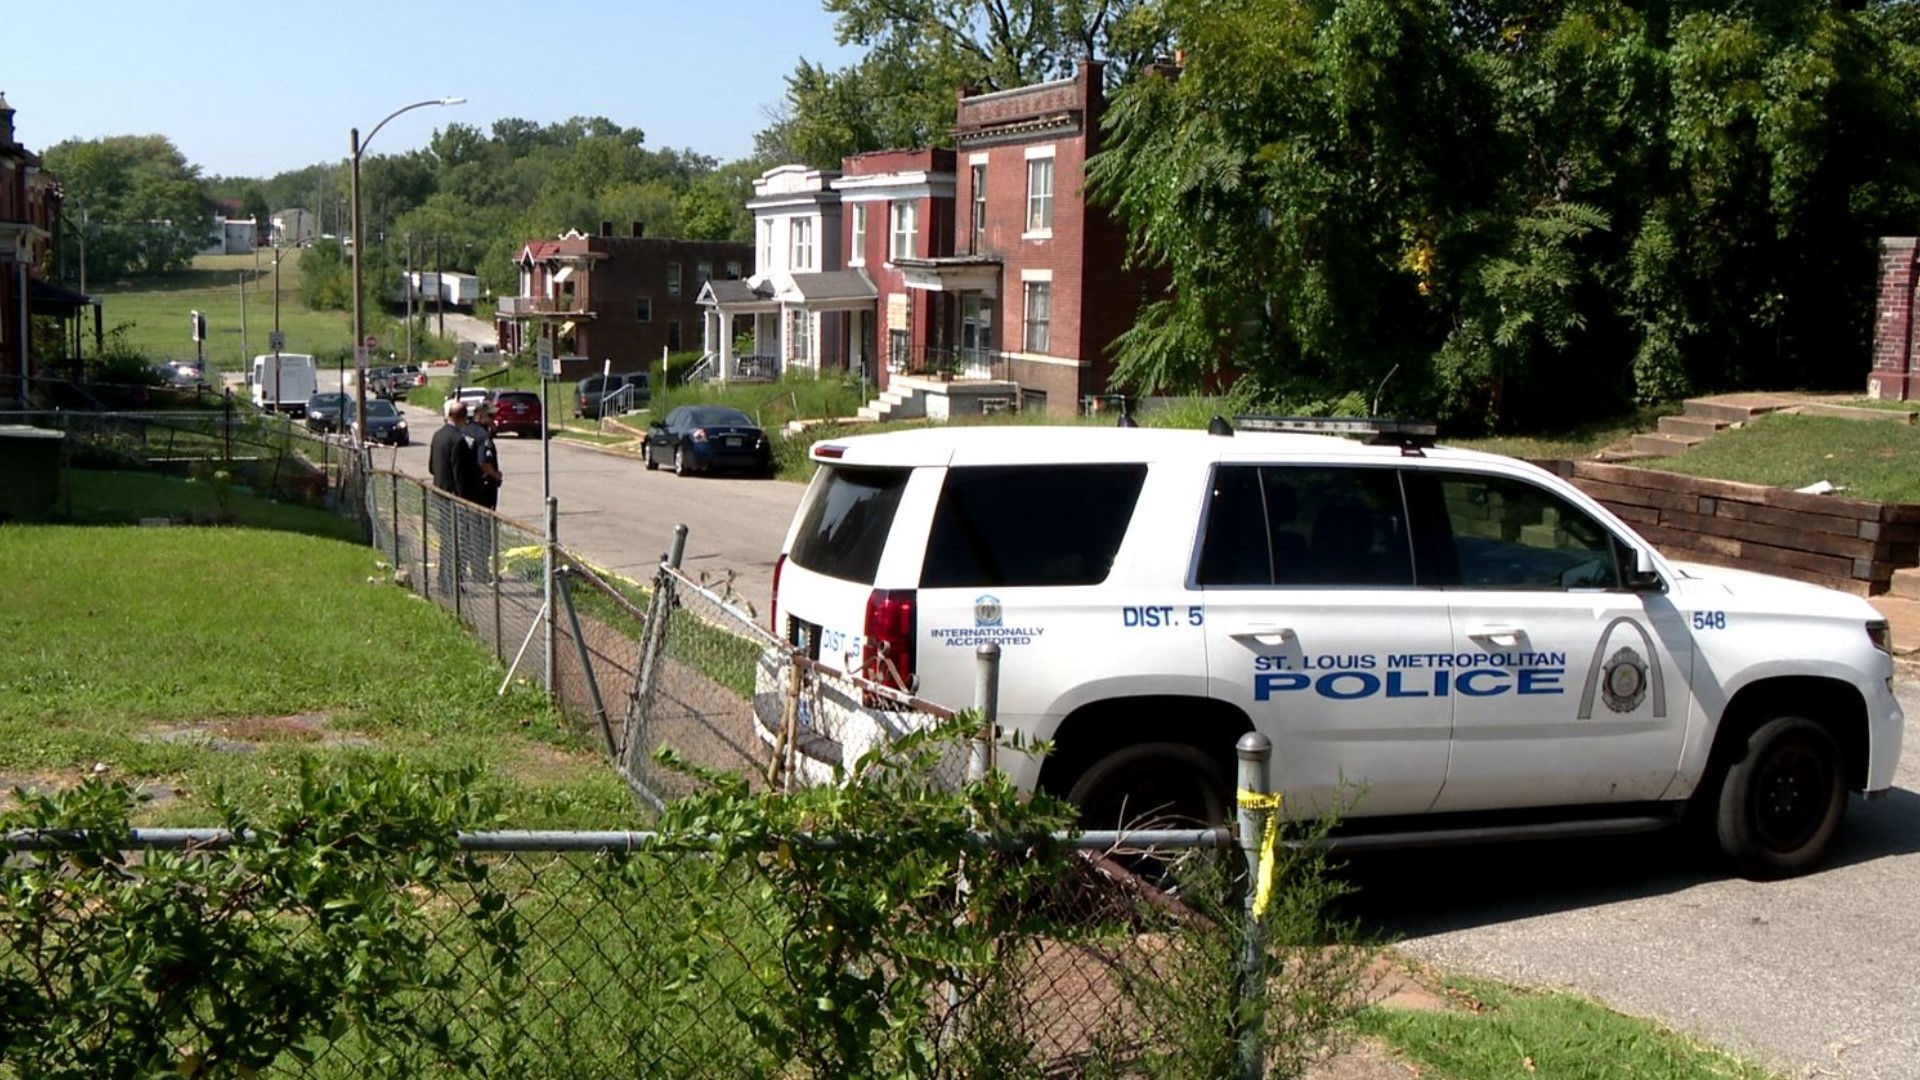 Police said the shooting happened shortly before 2 p.m. in the 5900 block of Hamilton Terrace, in the city's Hamilton Heights neighborhood.